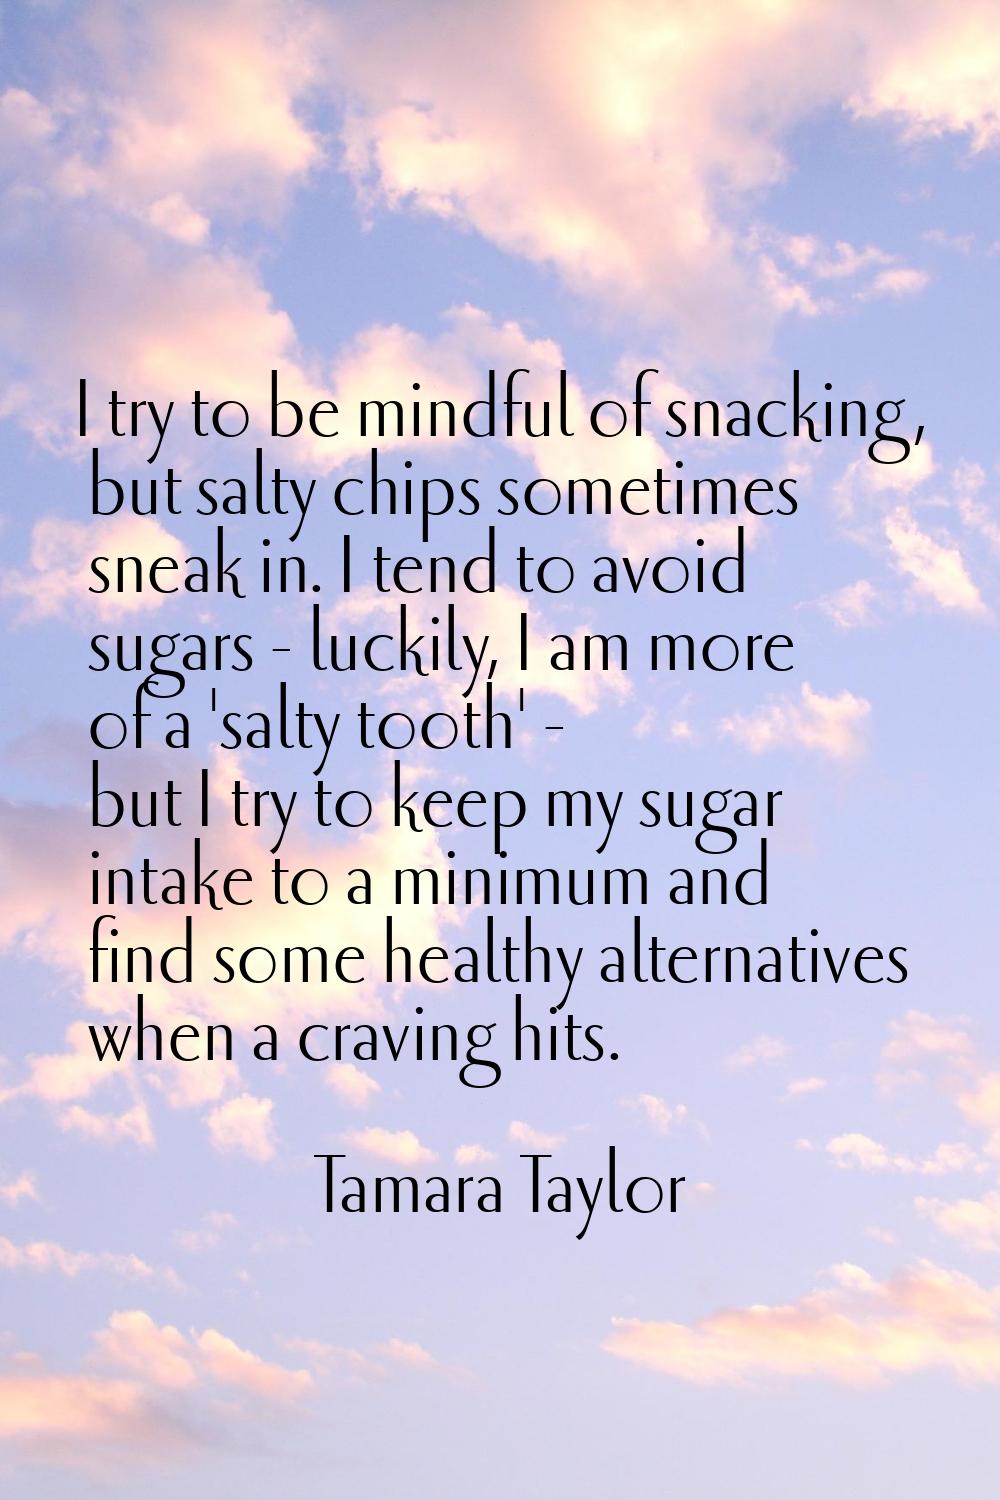 I try to be mindful of snacking, but salty chips sometimes sneak in. I tend to avoid sugars - lucki